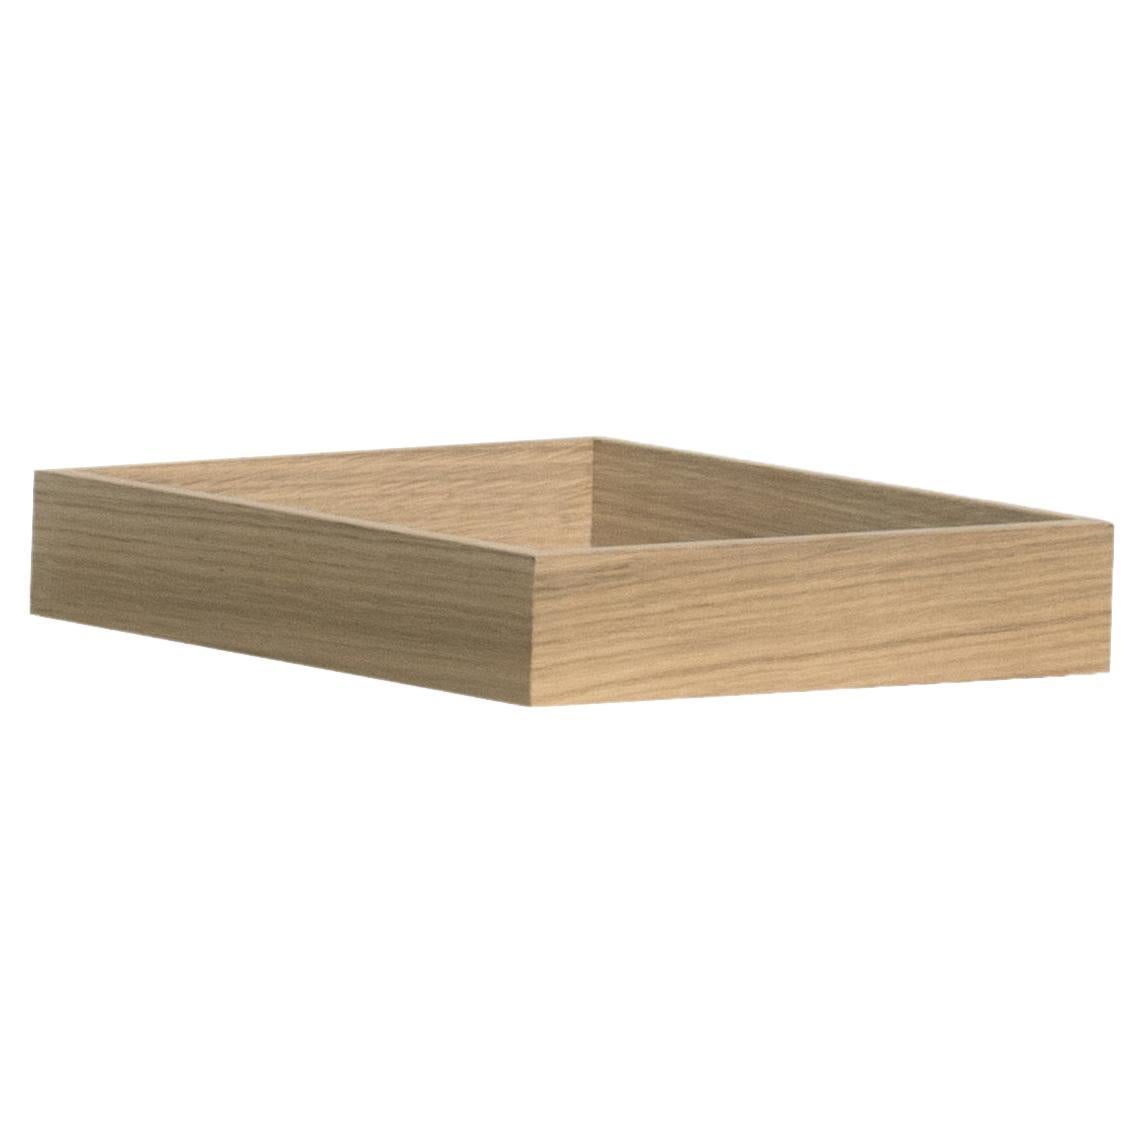 Set of 3 more boxes by Mentemano
Dimensions:
W 20 x D 28 x H 5 cm
W 20 x D 28 x H 25 cm
W 20 x D 28 x H 15 cm
Materials: oak


A tray and two boxes available in two dimensions with cover, made of wood with bronze mirror inserts as possible